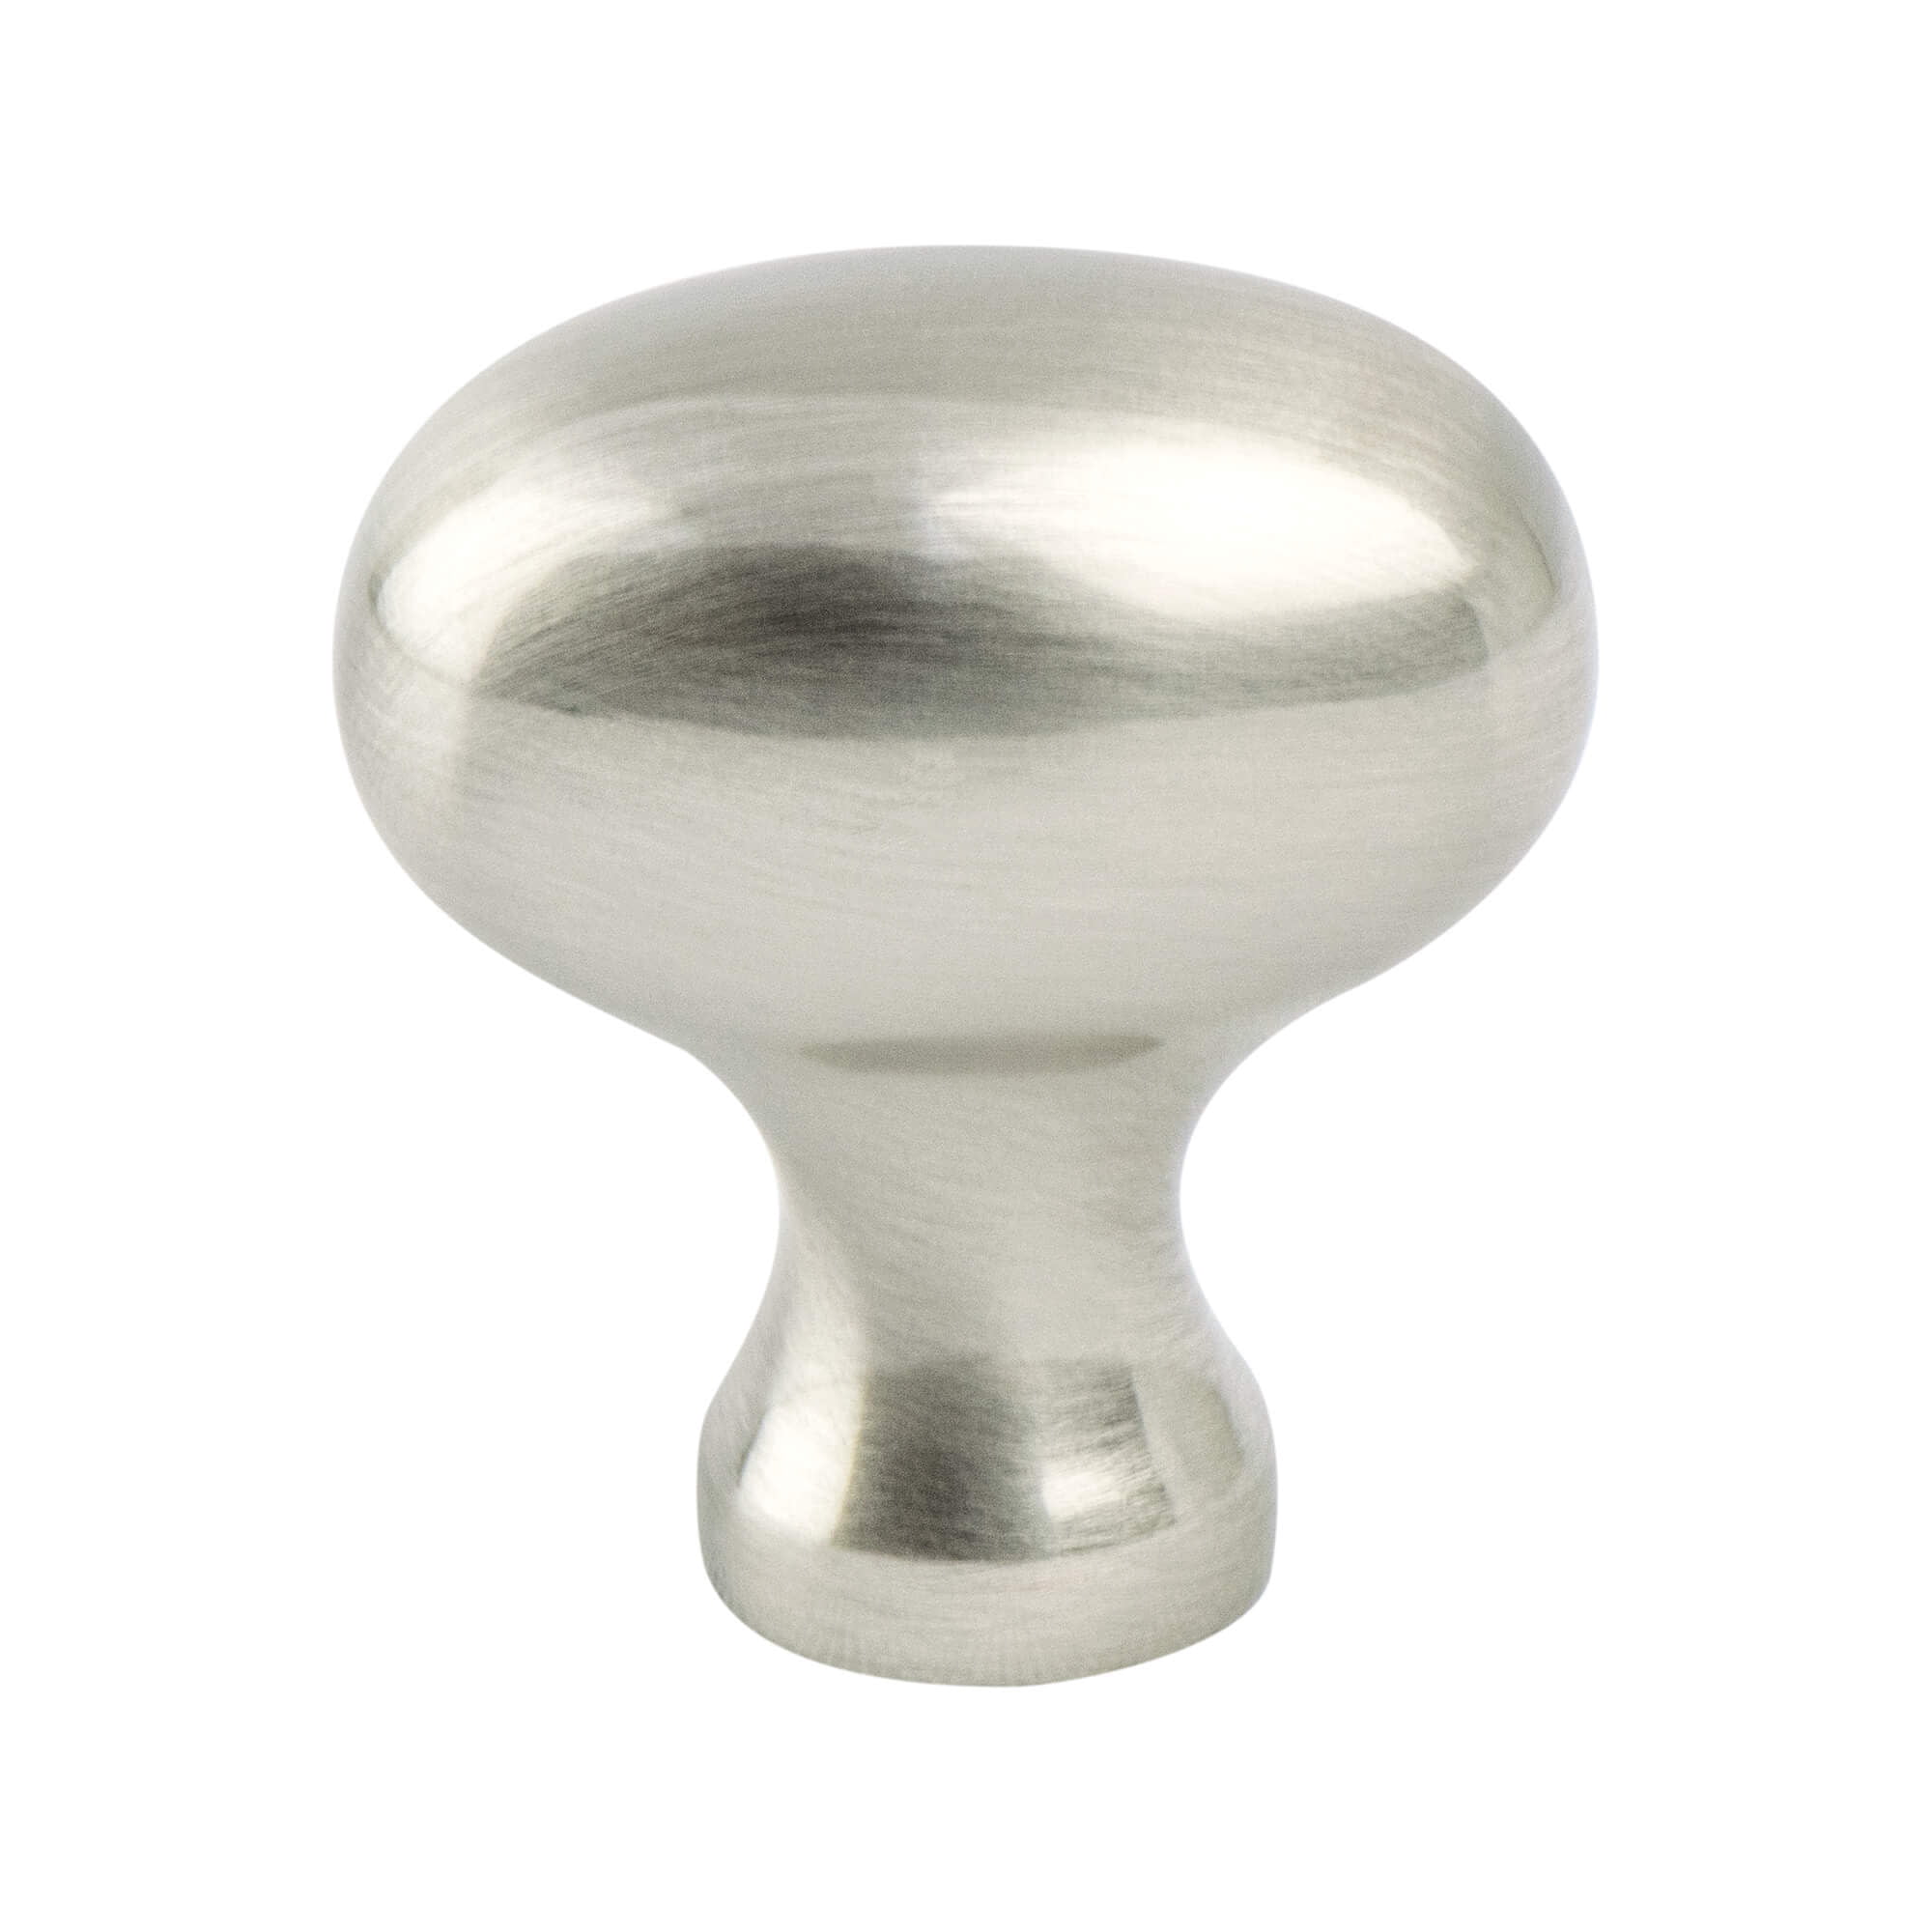 0920-1bpn-p 34 Mm Advantage Plus 3 Knob With Long Brushed Nickel